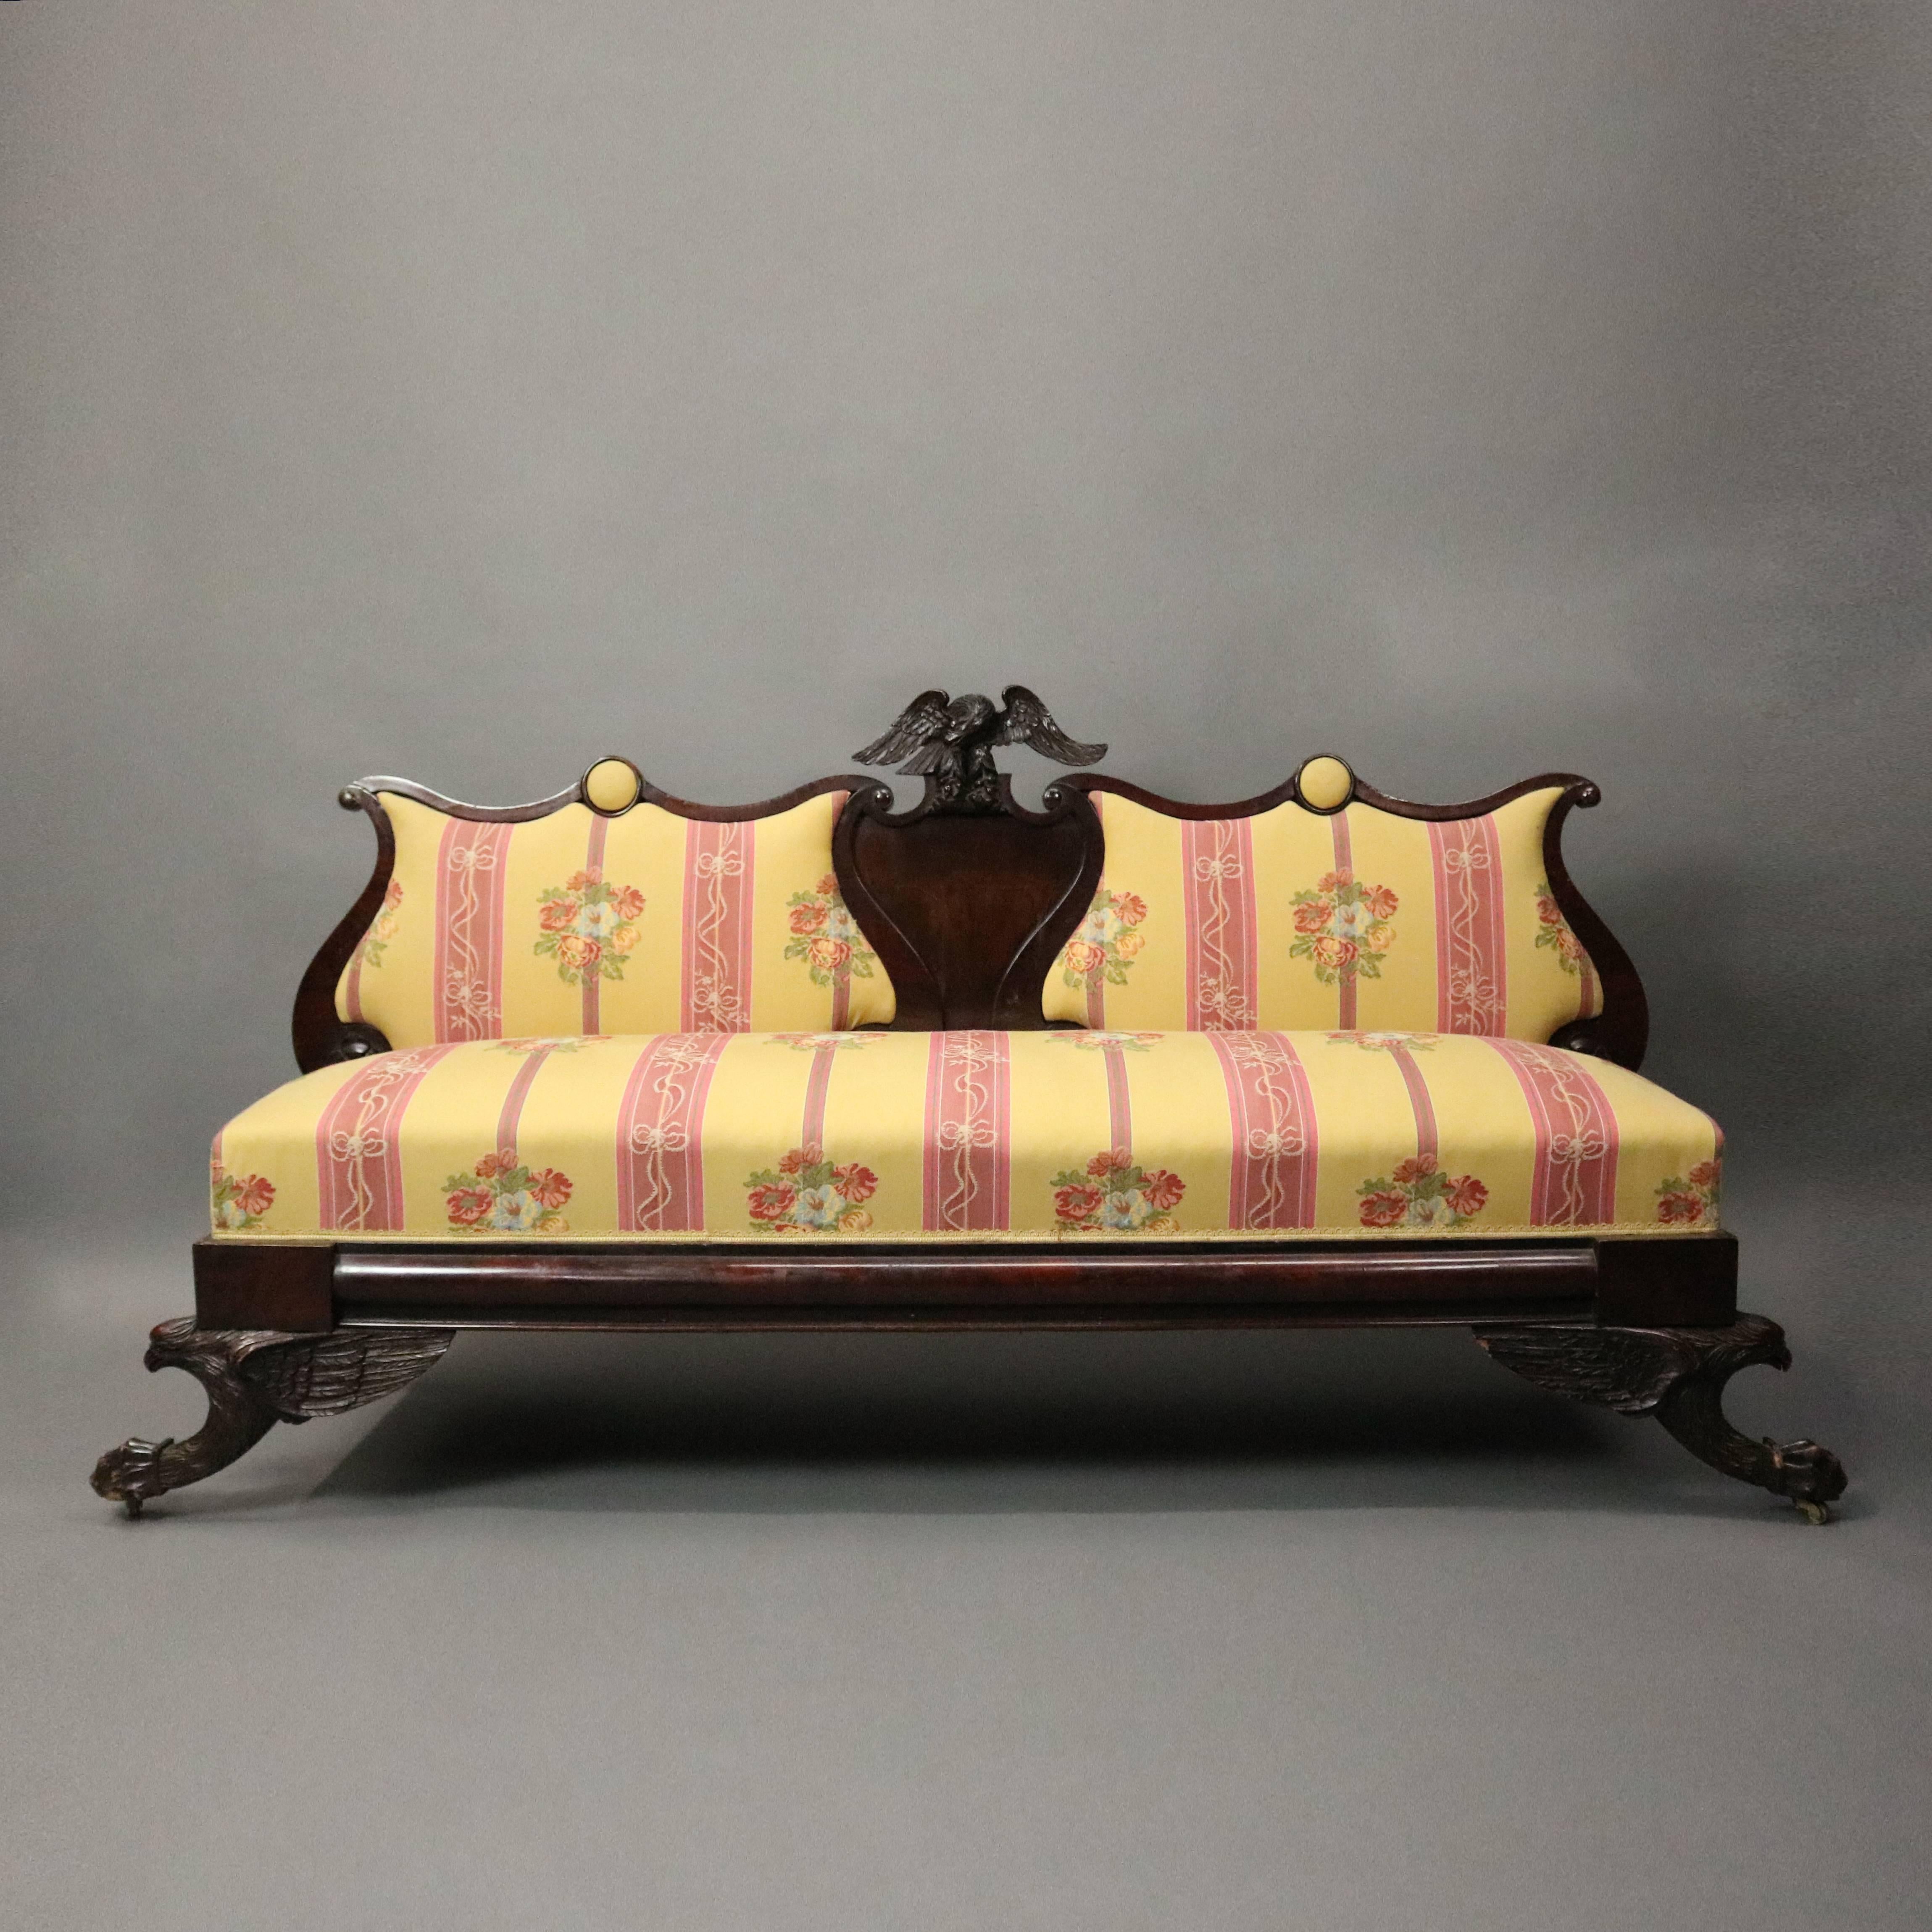 Antique American Empire sofa or settee features mahogany construction with highly detailed carved figural eagle legs and crest, triple shield shaped back, overall damask upholstered, reminiscent of Anthony Quervelle's work, circa 1820

Measures: